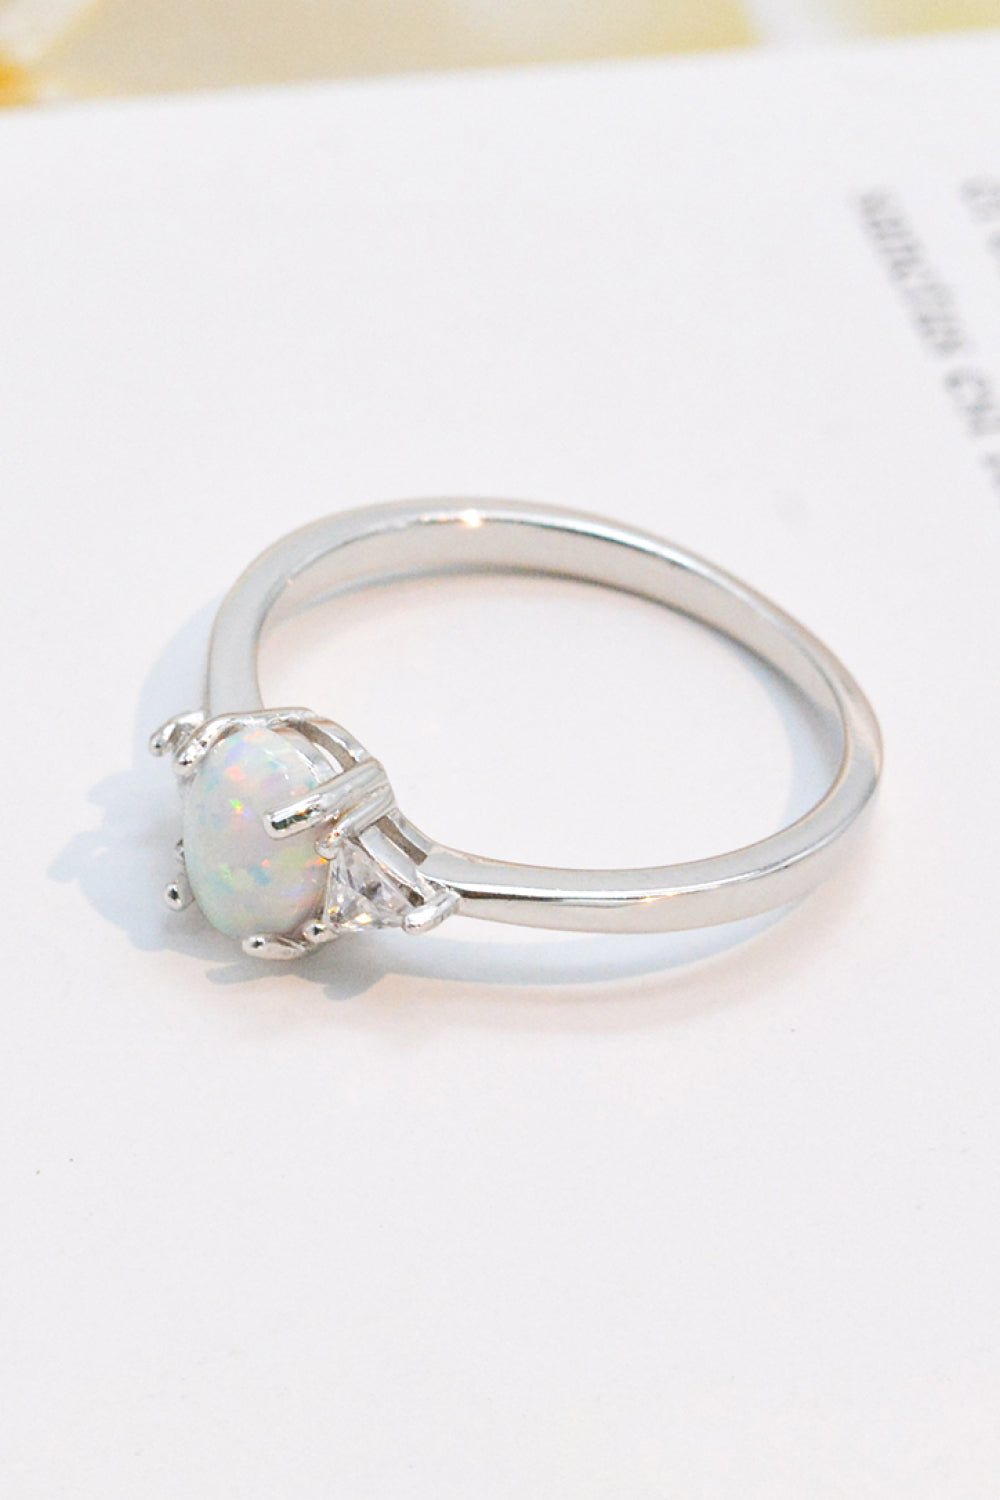 Contrast 925 Sterling Silver Opal Ring - Tophatter Deals